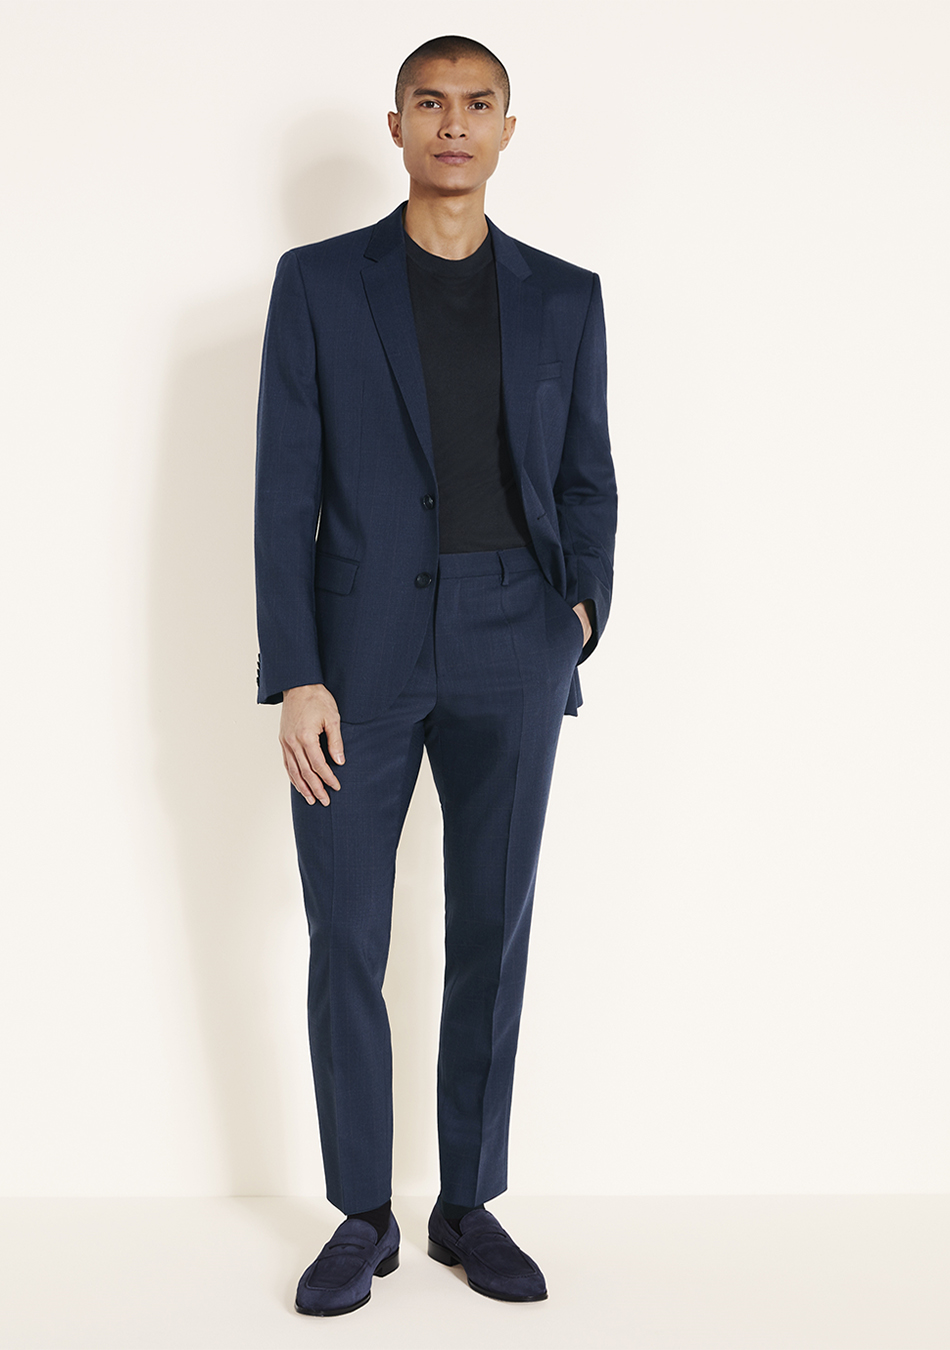 Navy suit jacket and pants, black crew-neck t-shirt, and navy blue loafers